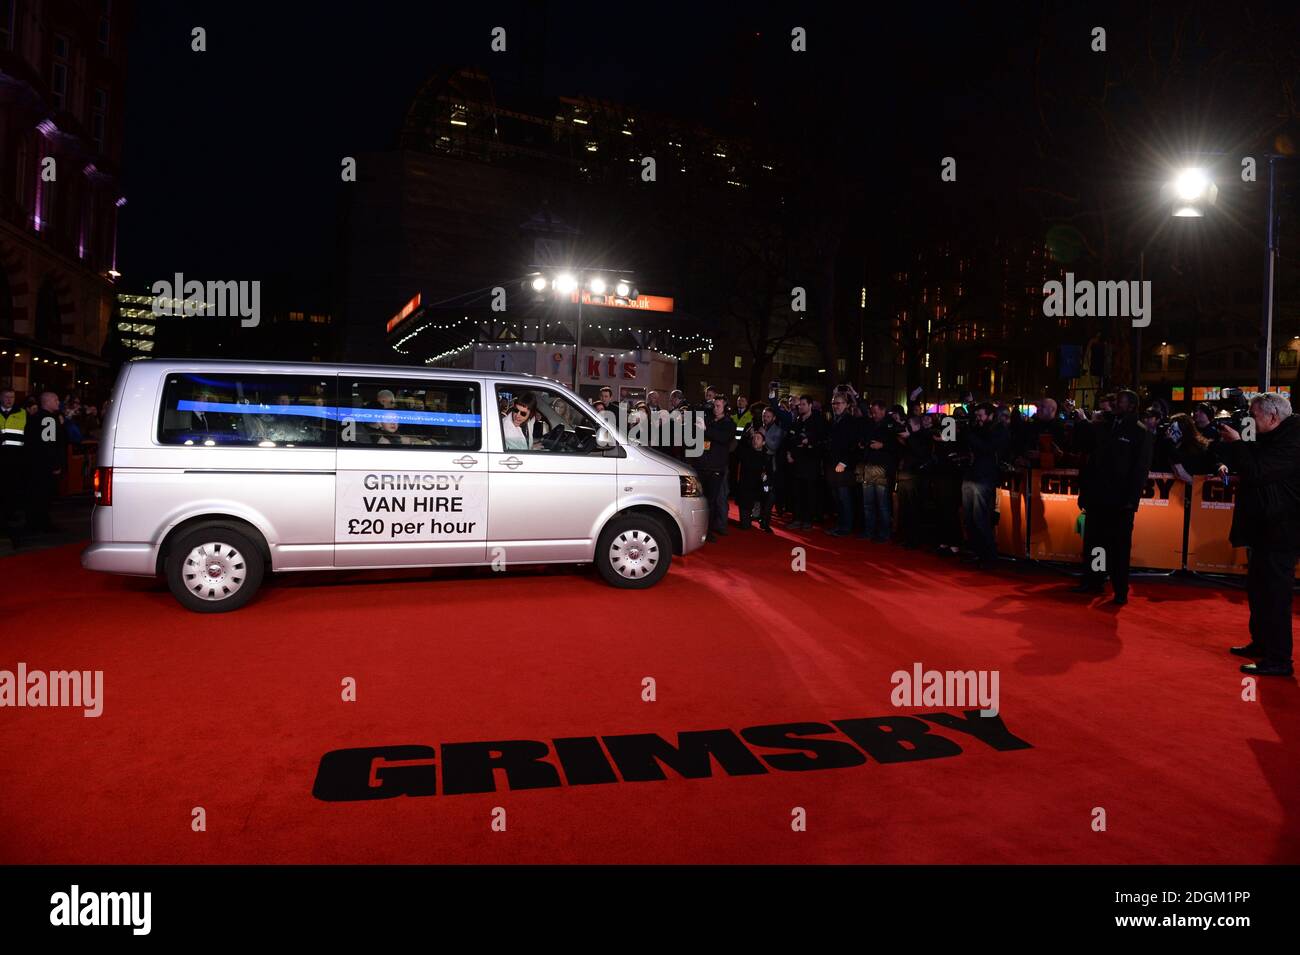 Sacha Baron Cohen As Norman Nobby Grimsby Attending The World Premiere Of Grimsby Held At